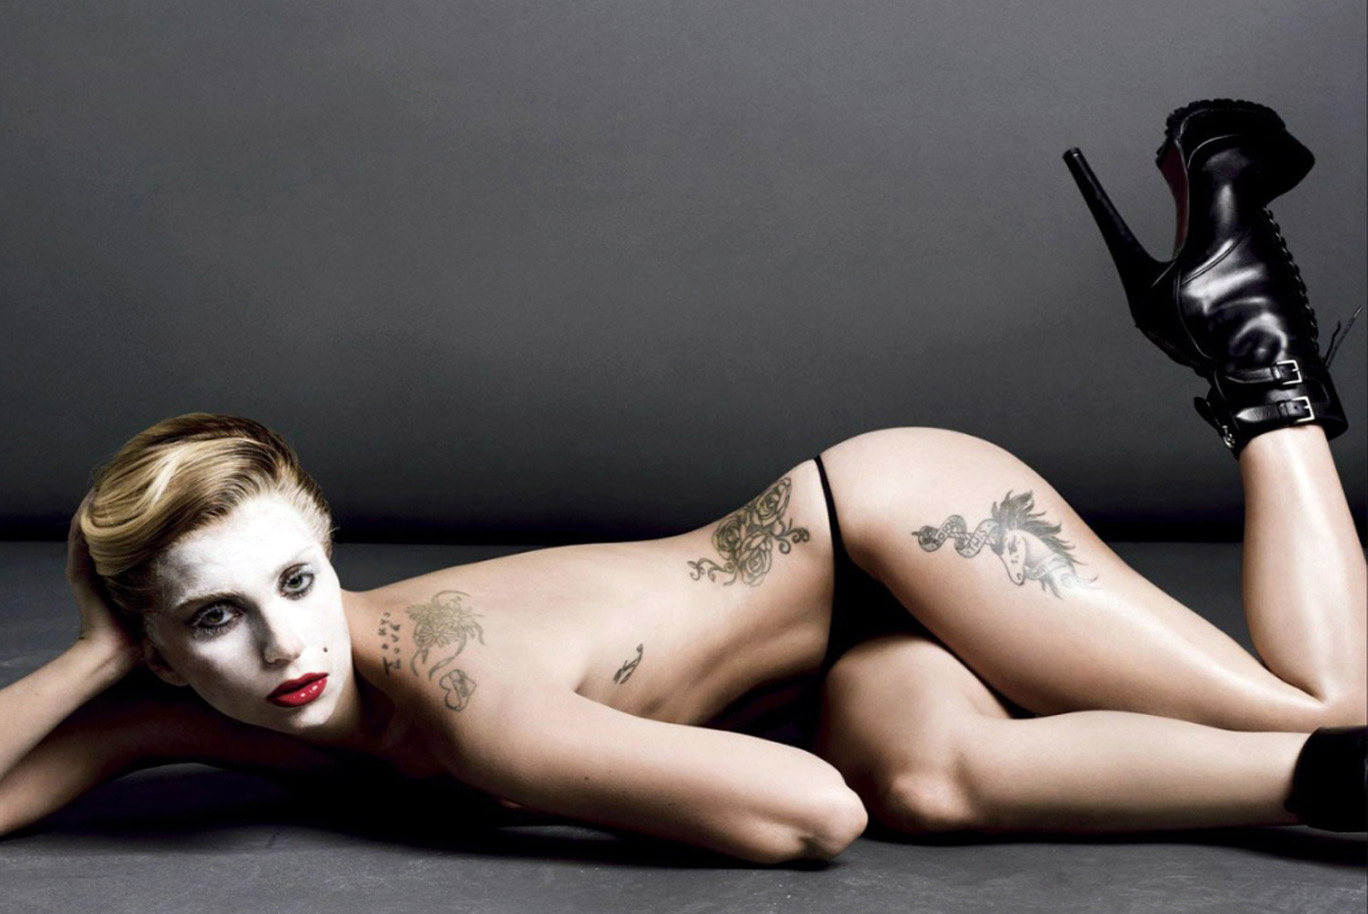 Lady gaga strips naked for ice bath after music photo shoot for stupid love readsector